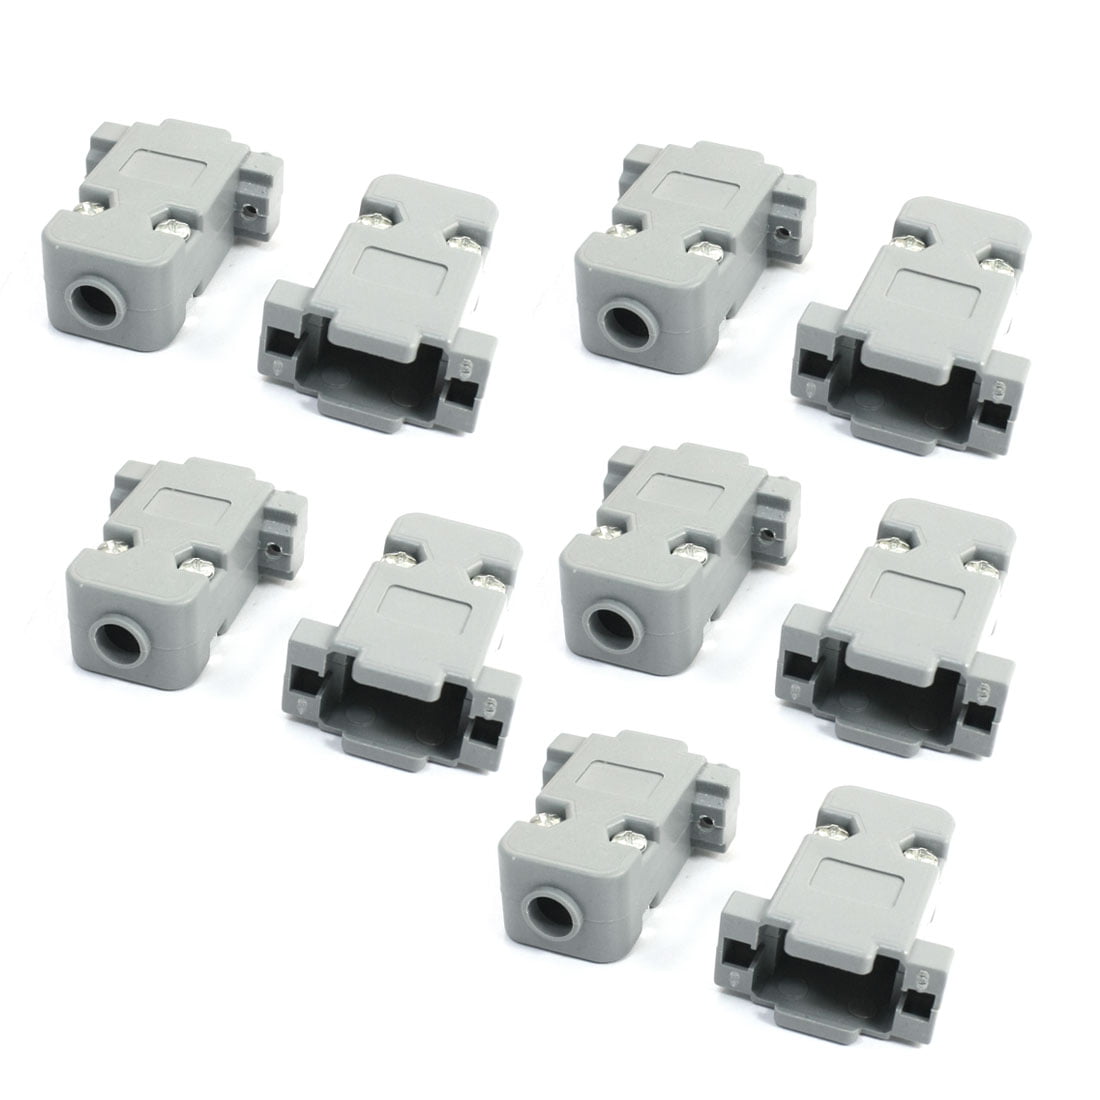 5X DB9 9-Pin Female Solder Cup Connector with Plastic Hood Shell & Hardware DB-9 